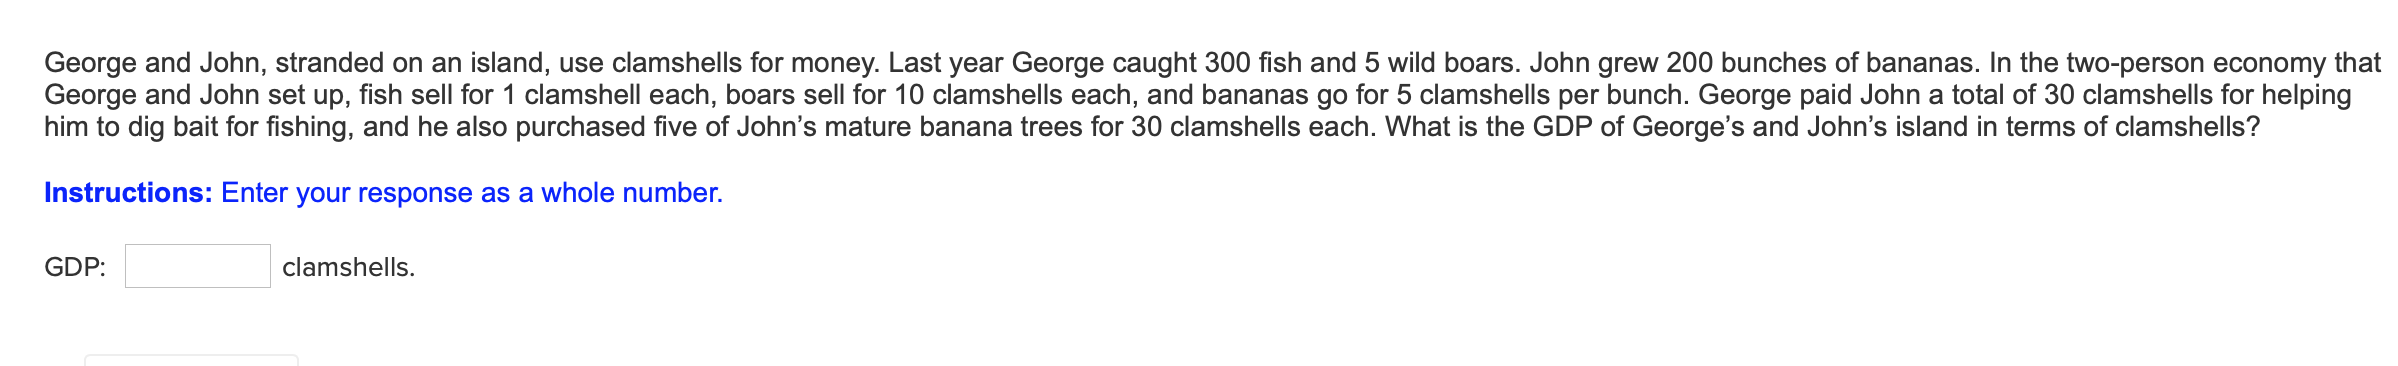 George and John, stranded on an island, use clamshells for money. Last year George caught 300 fish and 5 wild boars. John grew 200 bunches of bananas. In the two-person economy that
George and John set up, fish sell for 1 clamshell each, boars sell for 10 clamshells each, and bananas go for 5 clamshells per bunch. George paid John a total of 30 clamshells for helping
him to dig bait for fishing, and he also purchased five of John's mature banana trees for 30 clamshells each. What is the GDP of George's and John's island in terms of clamshells?
Instructions: Enter your response as a whole number.
GDP:
clamshells.
